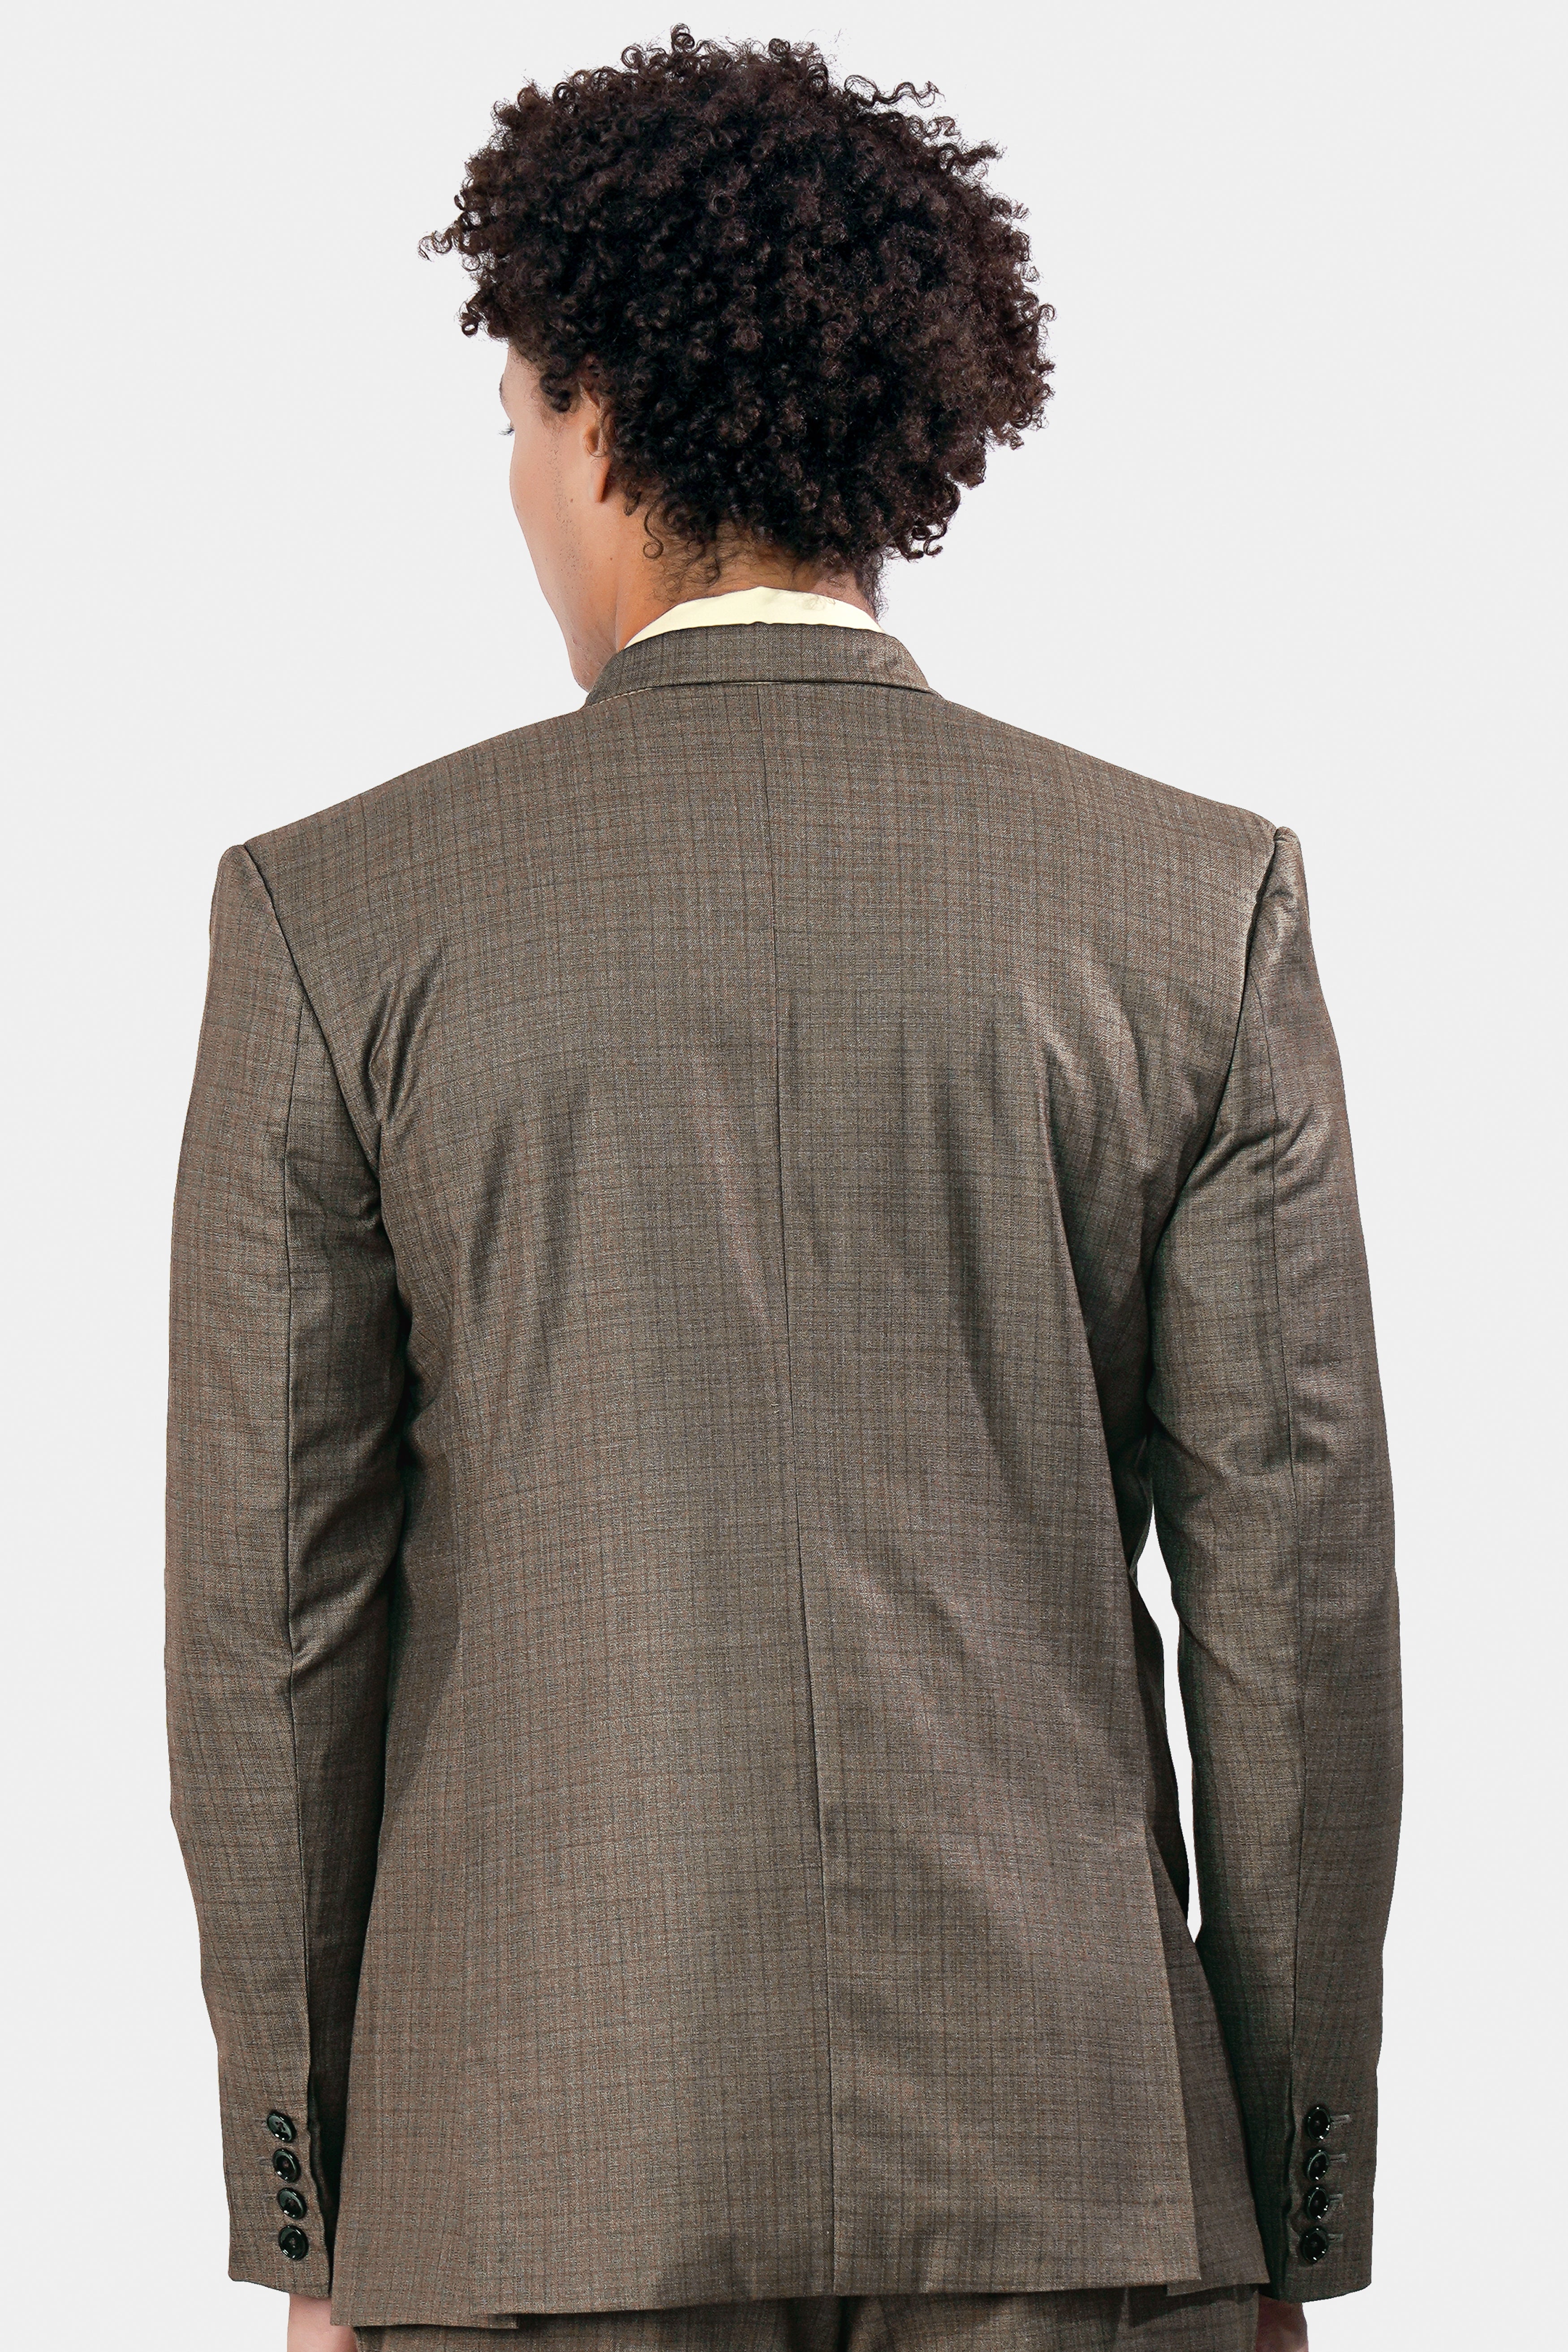 Hemp Brown Checkered Wool Rich Double Breasted Blazer BL2935-DB-36, BL2935-DB-38, BL2935-DB-40, BL2935-DB-42, BL2935-DB-44, BL2935-DB-46, BL2935-DB-48, BL2935-DB-50, BL2935-DB-52, BL2935-DB-54, BL2935-DB-56, BL2935-DB-58, BL2935-DB-60